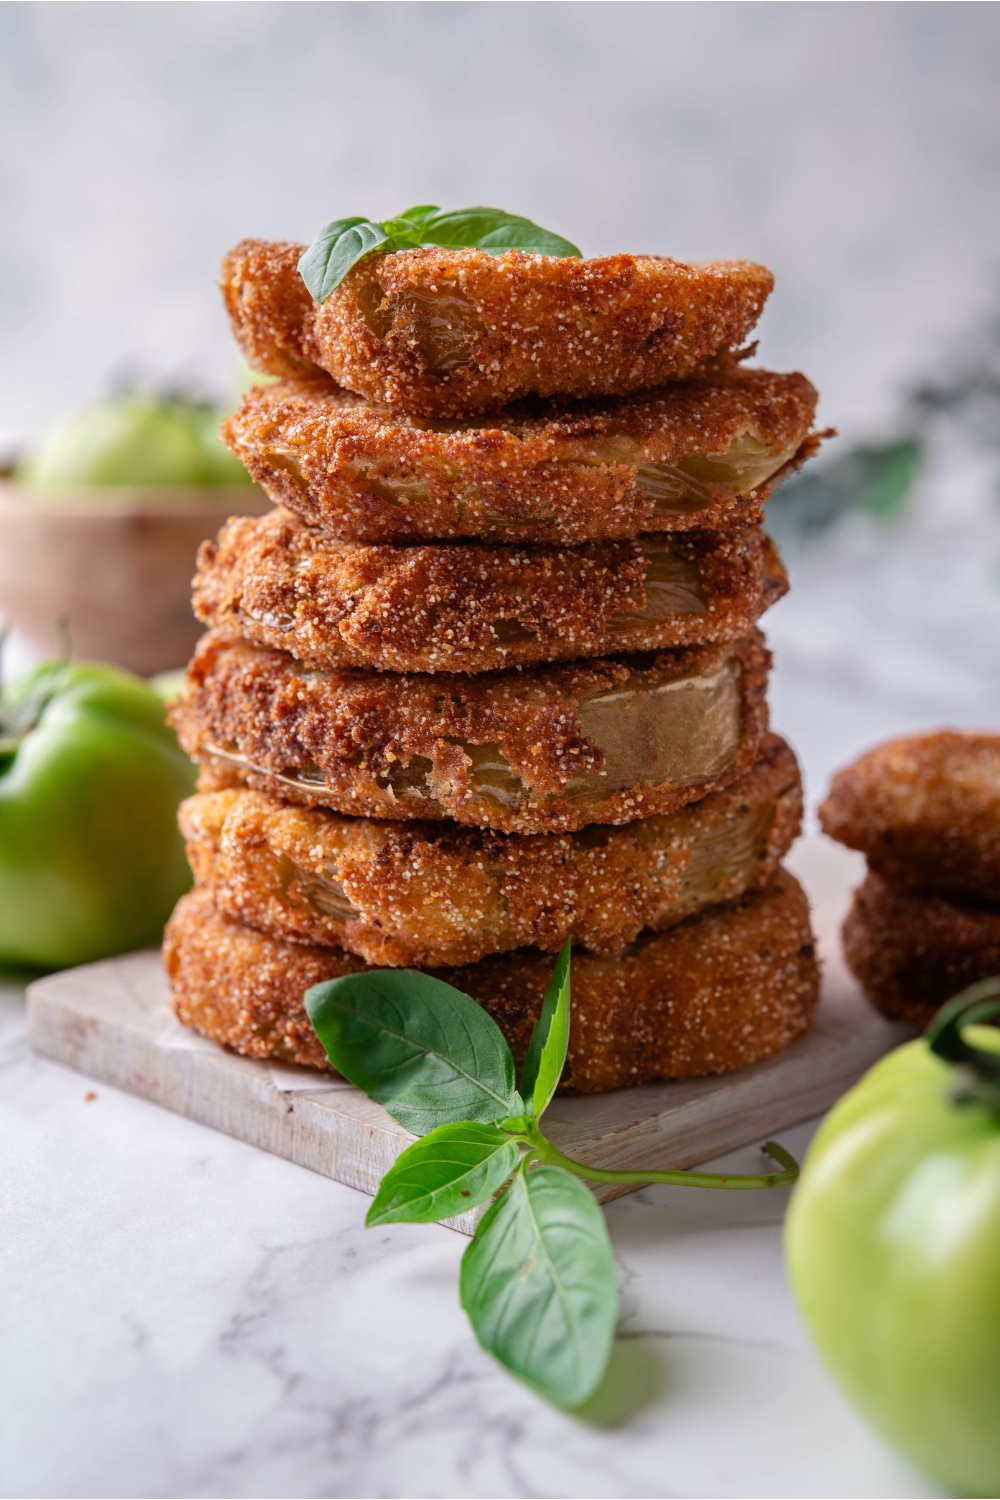 Six breaded and fried green tomatoes stacked evenly on top of each other with a garnish of green herbs on top and fresh green tomatoes surrounding the stack.